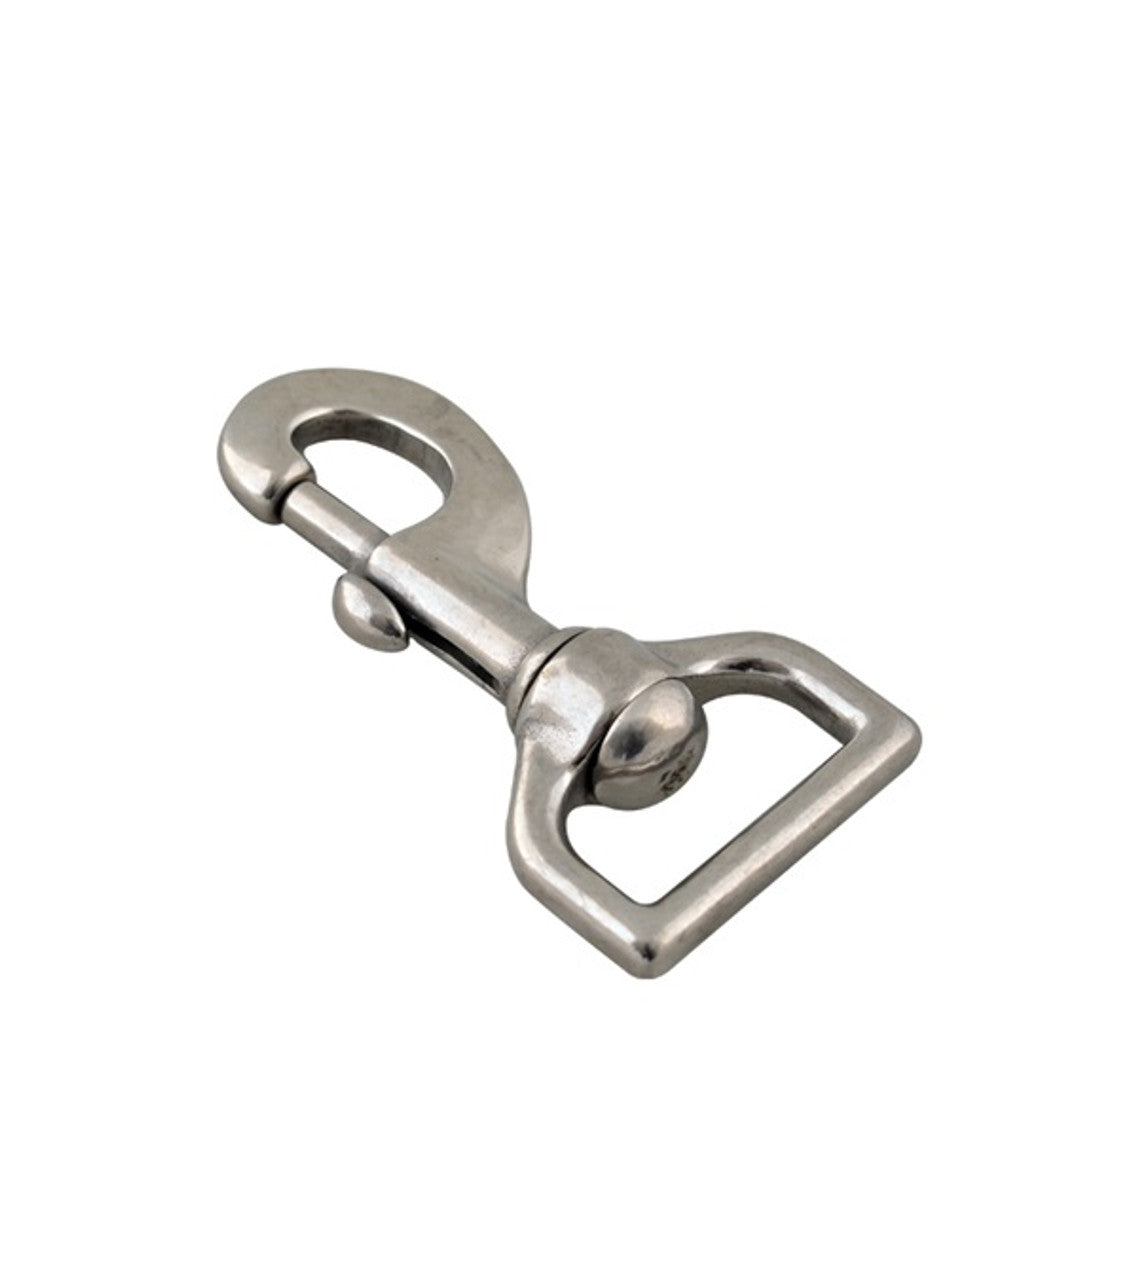 swivel snap hook, swivel snap hook Suppliers and Manufacturers at